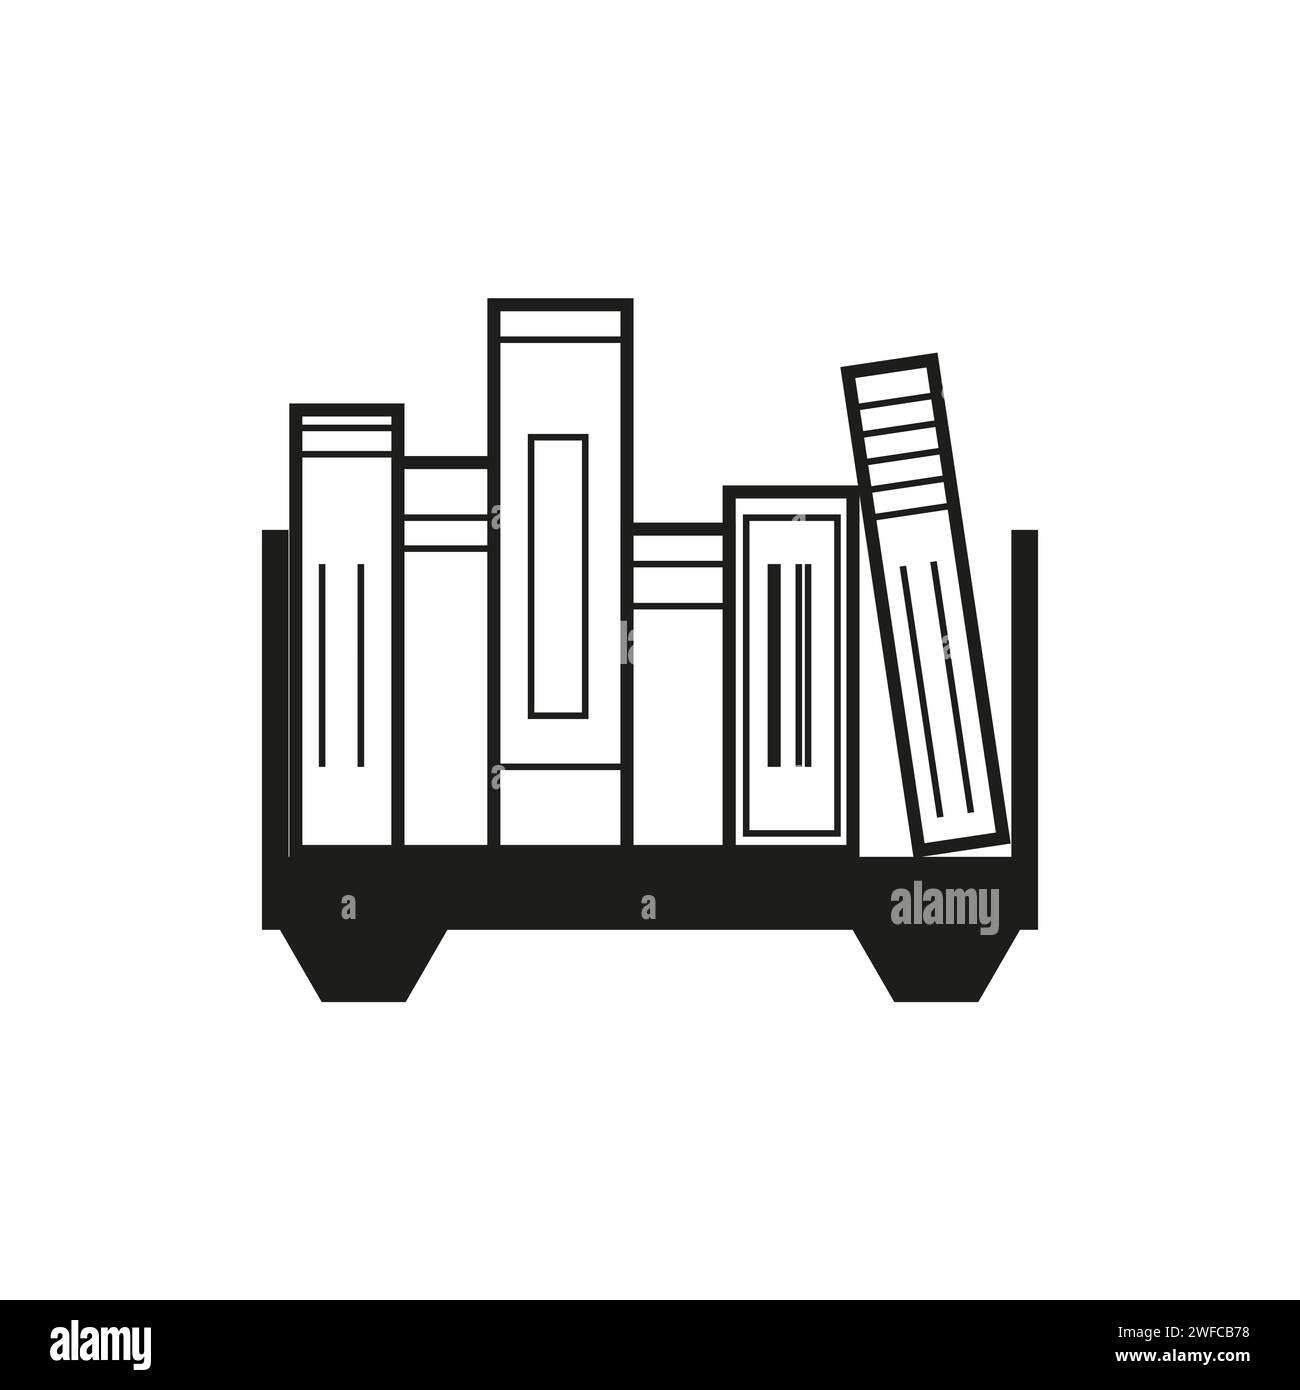 Shelf with books icon. Vector illustration. Stock image. EPS 10. Stock Vector